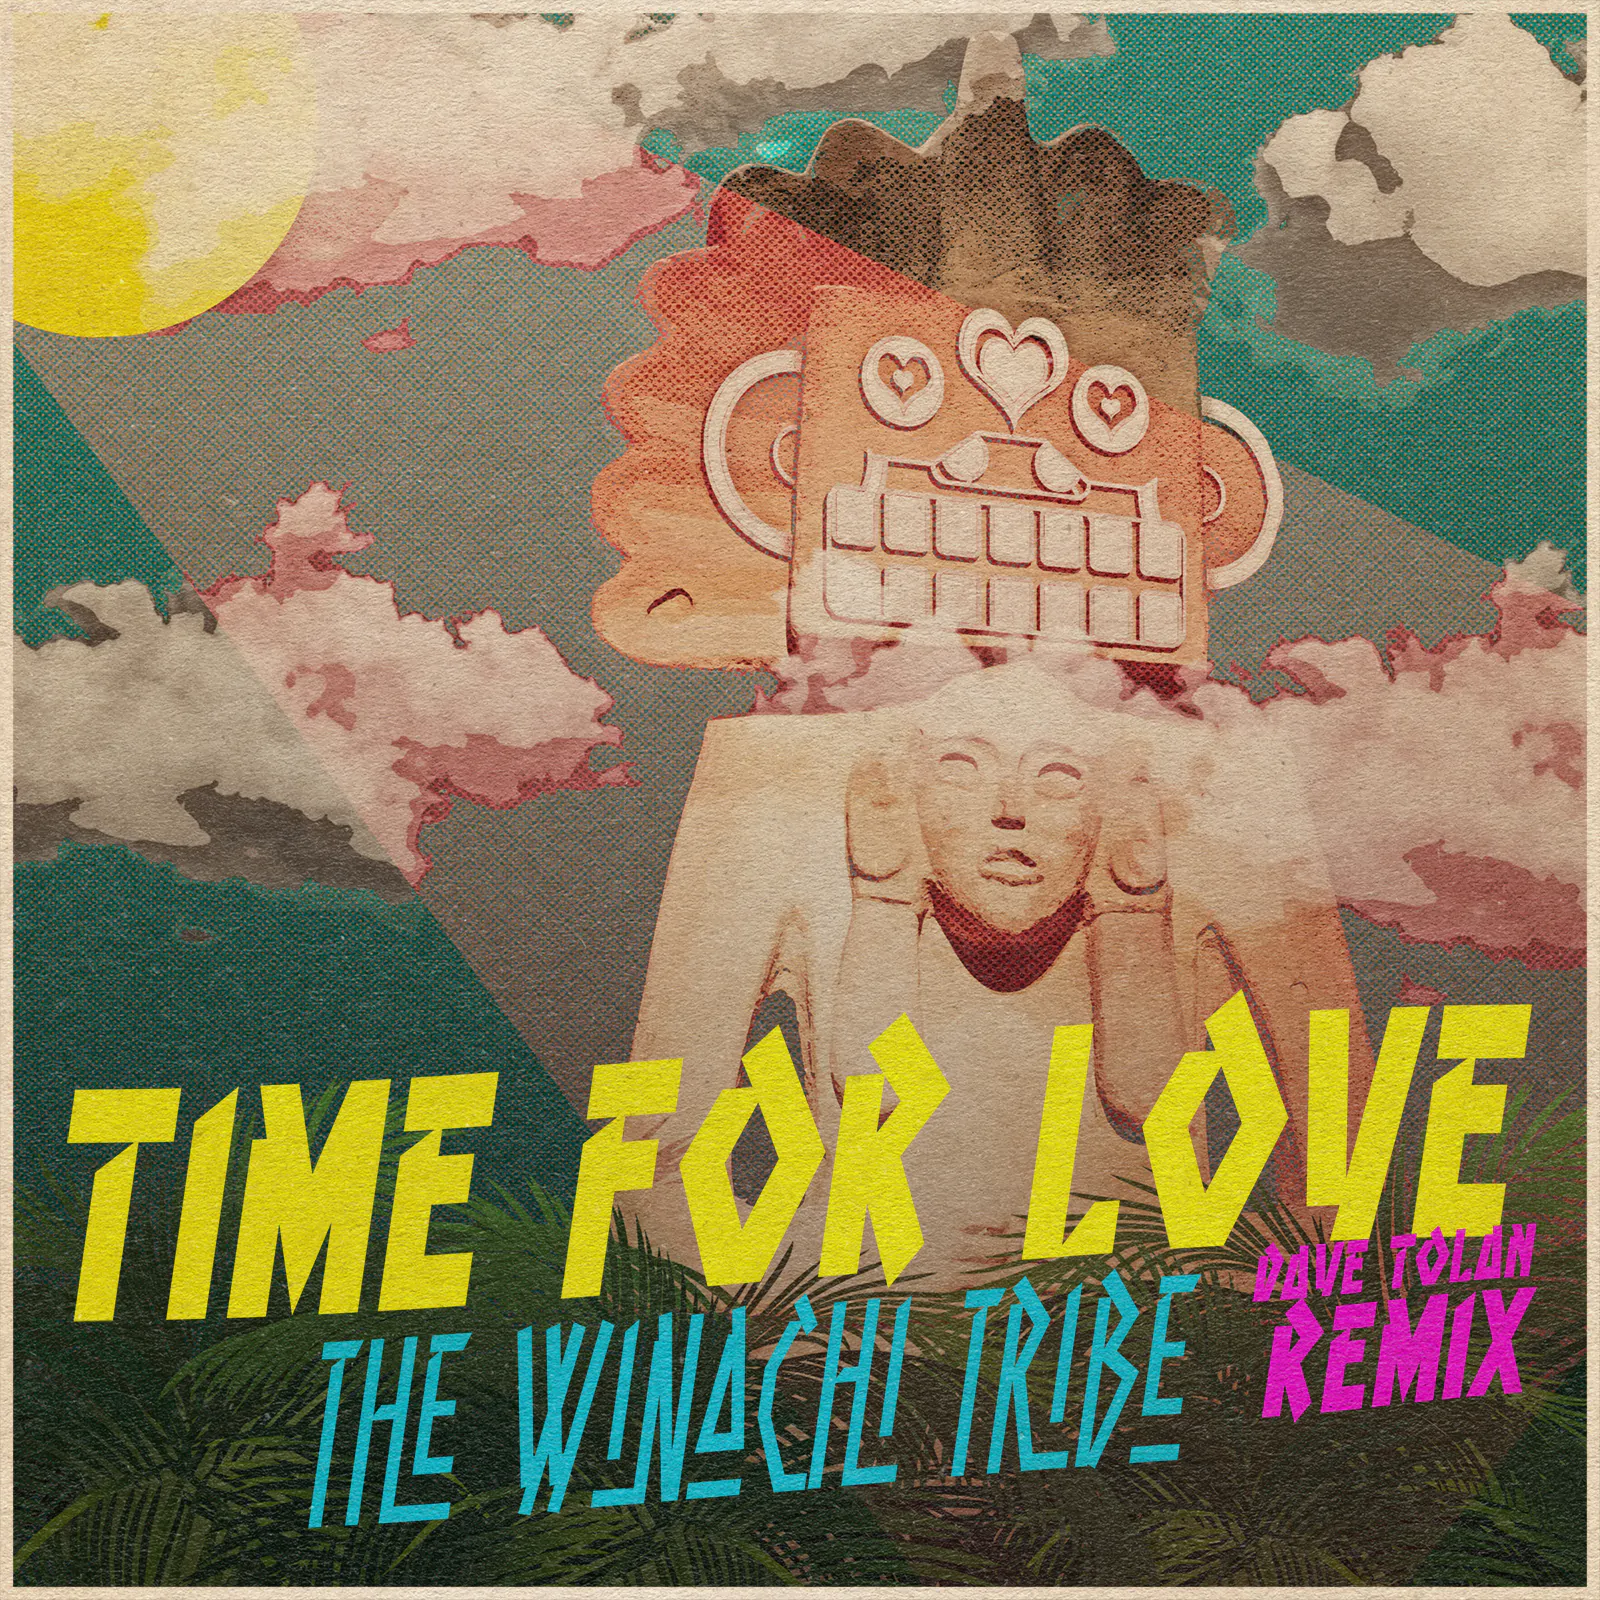 THE WINACHI TRIBE release ‘Time for Love – (Dave Tolan remix)’ – Listen Now!